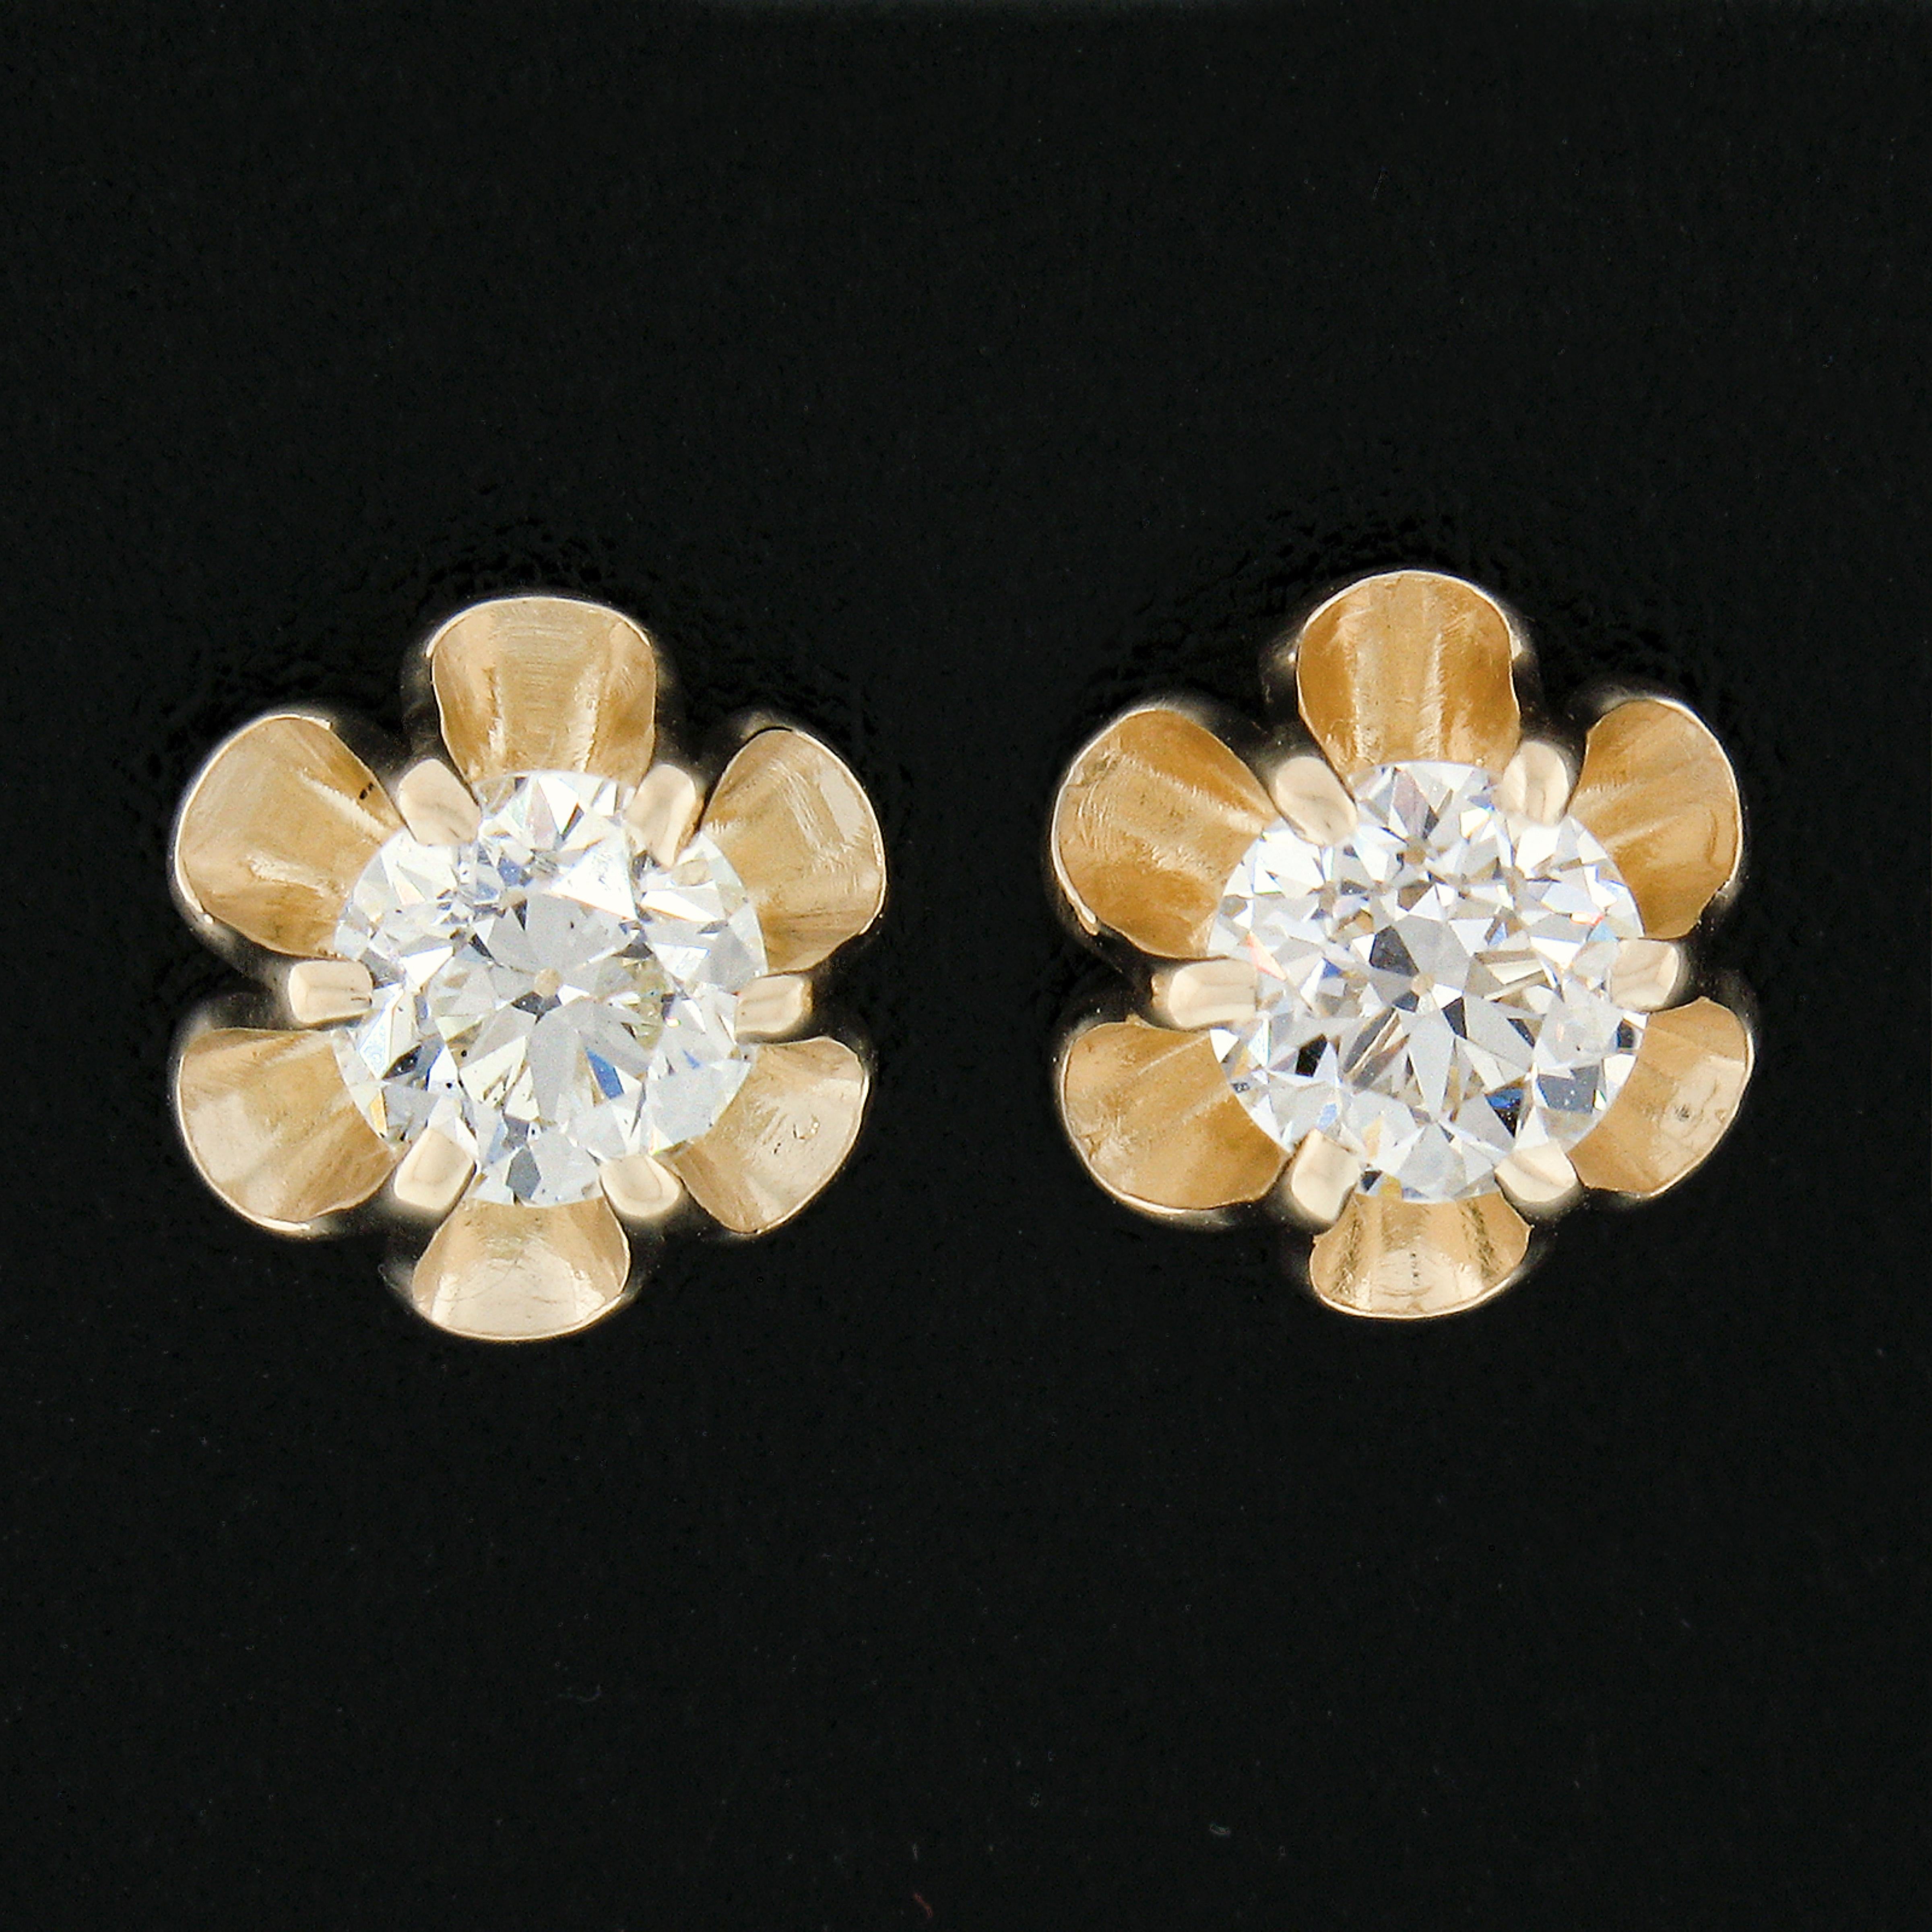 These gorgeous stud earrings are crafted in solid 14k yellow gold and feature, antique, old European cut diamonds that are elegantly set in brand new buttercup prong basket settings. The stunning diamonds total 0.76 carats in weight and are